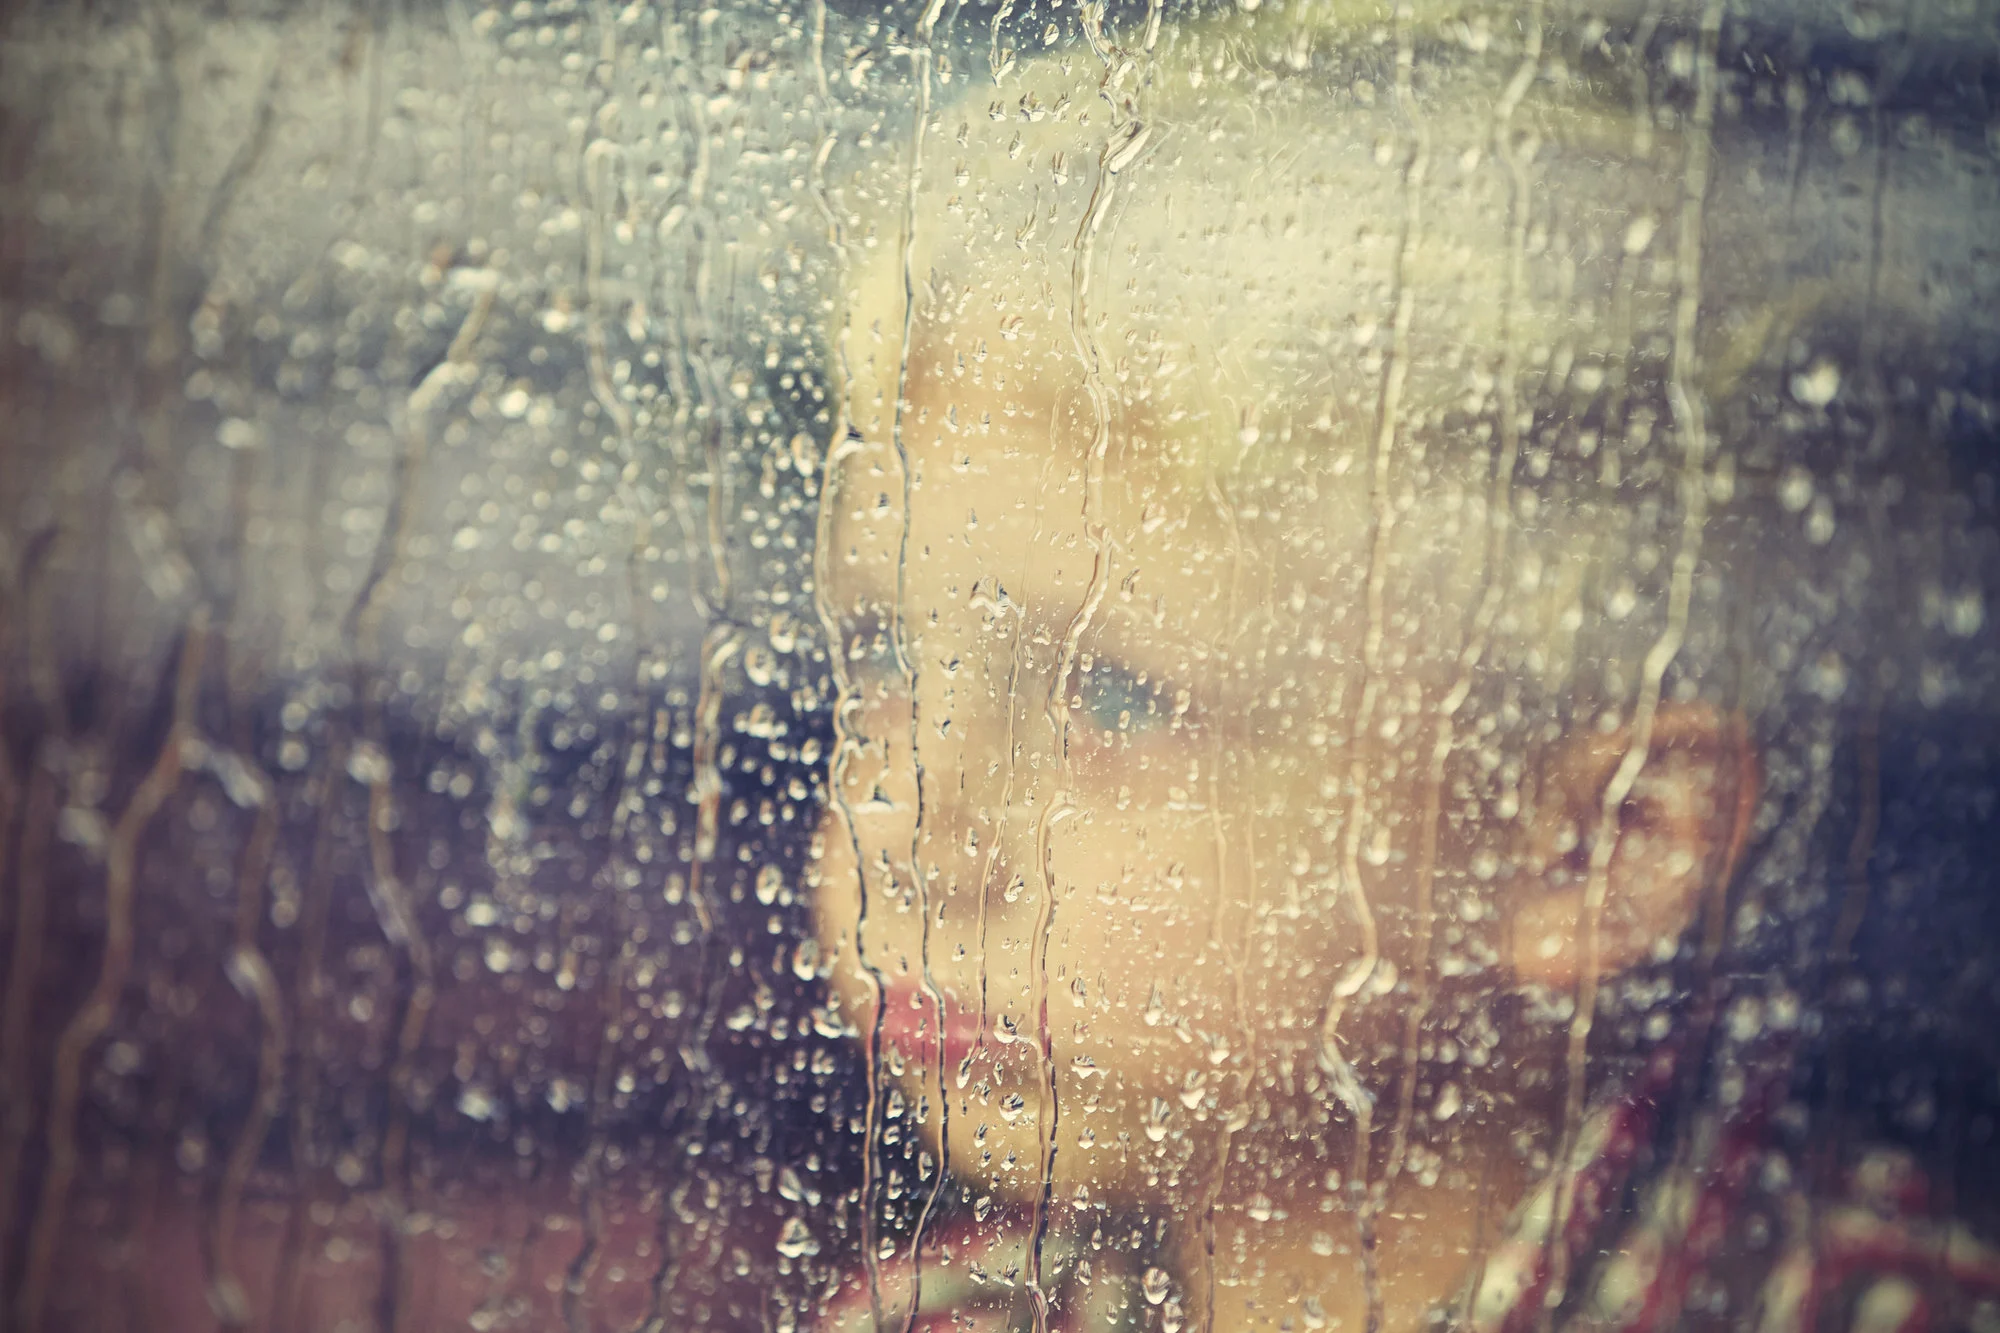 kid looking out window on rainy day